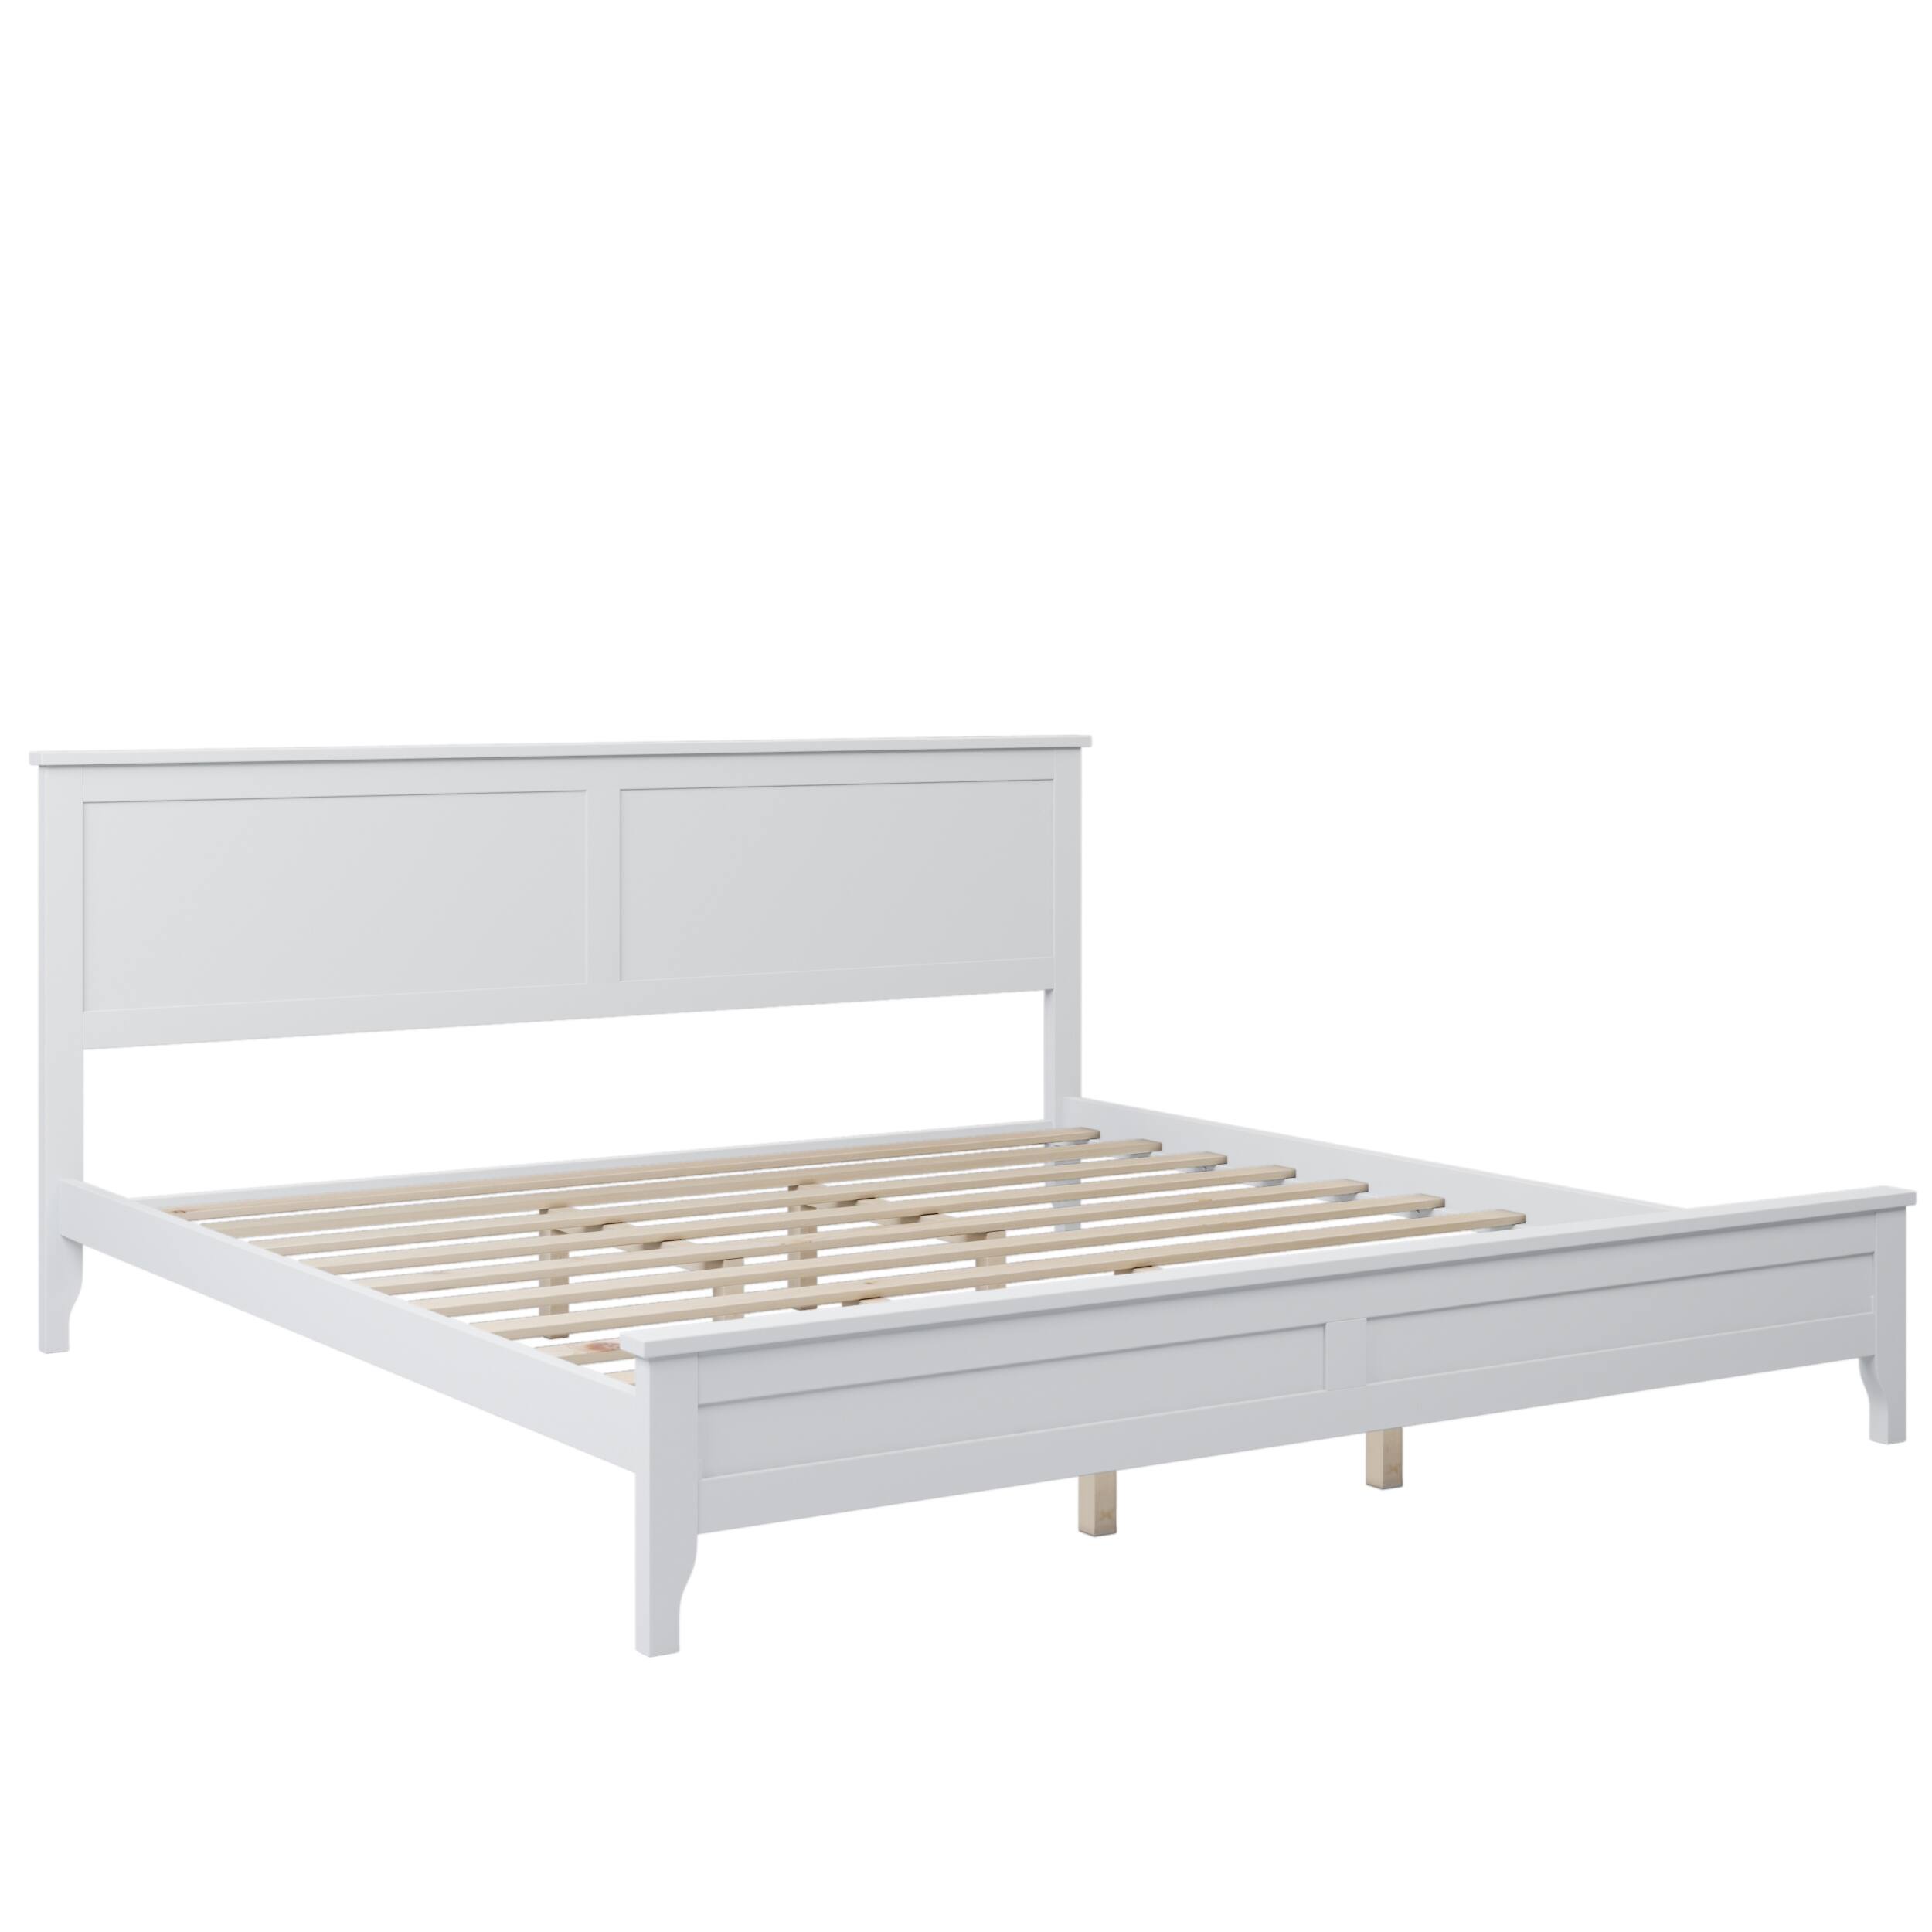 King Size Modern Solid Wood Platform Bed with Headboard, White